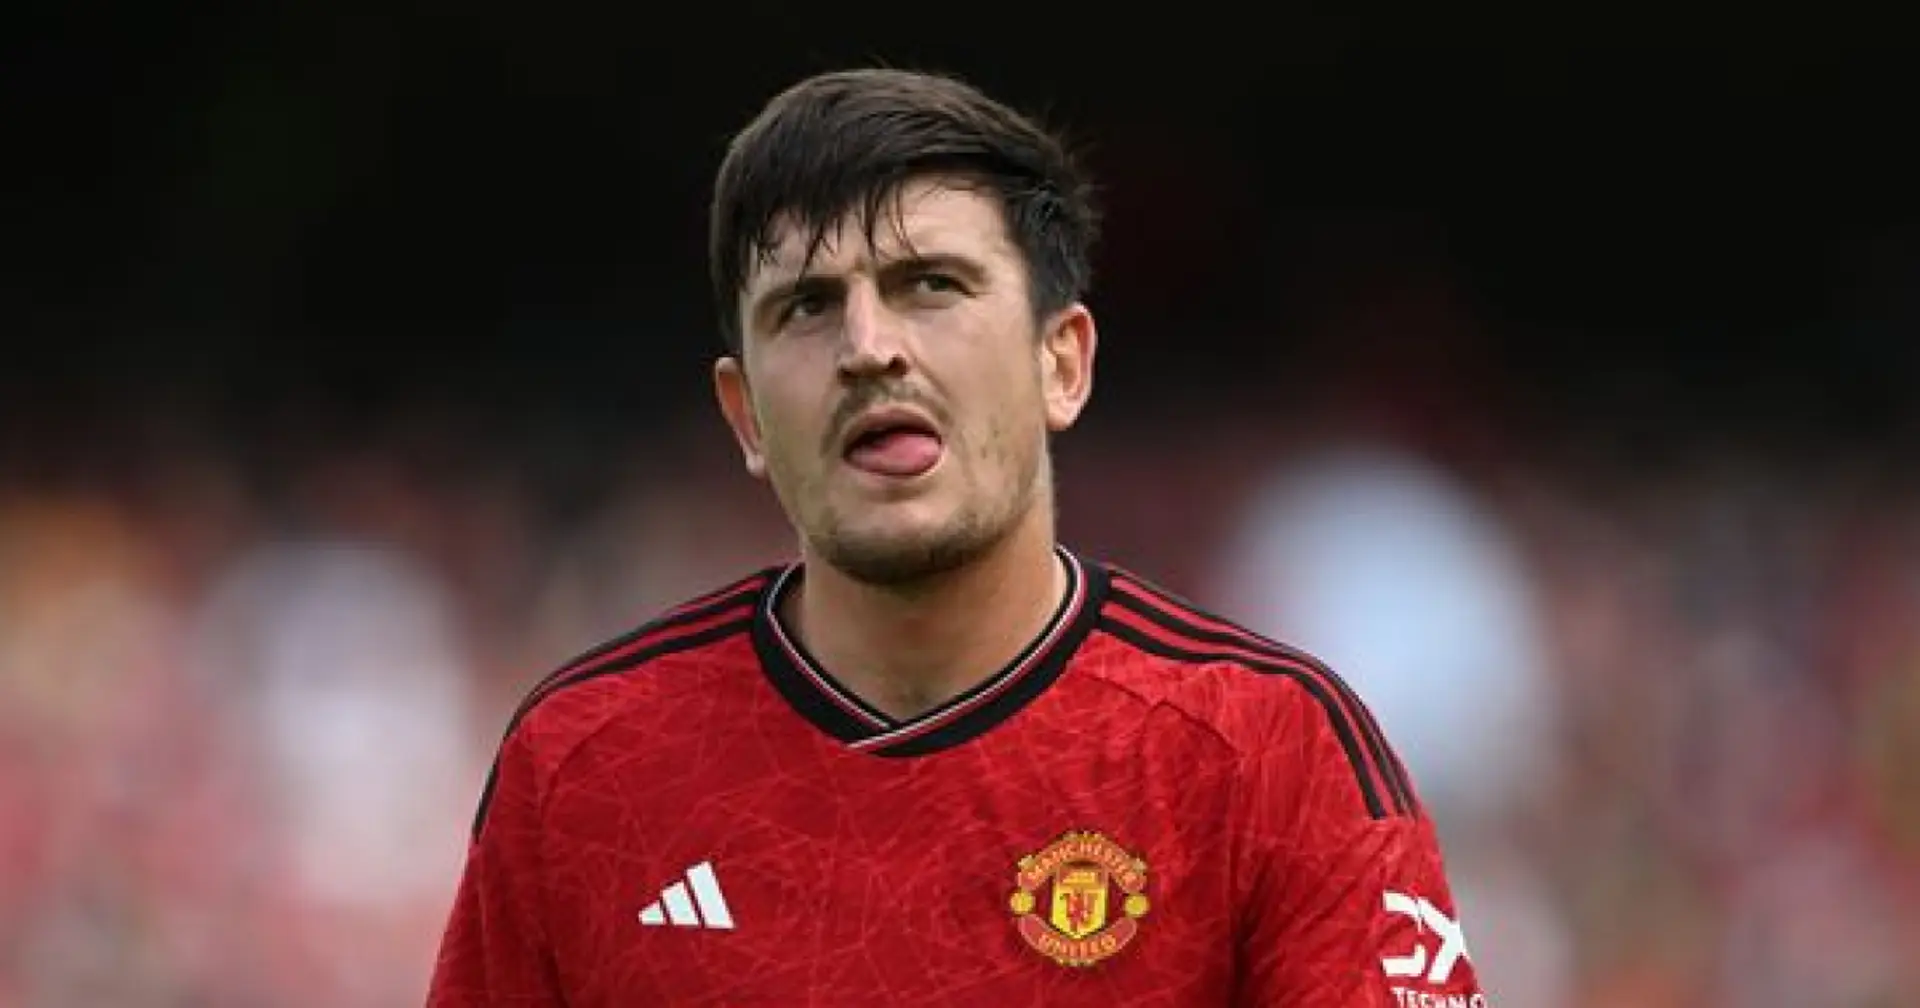 Harry Maguire on his way to West Ham after clubs agree fee (reliability: 5 stars)